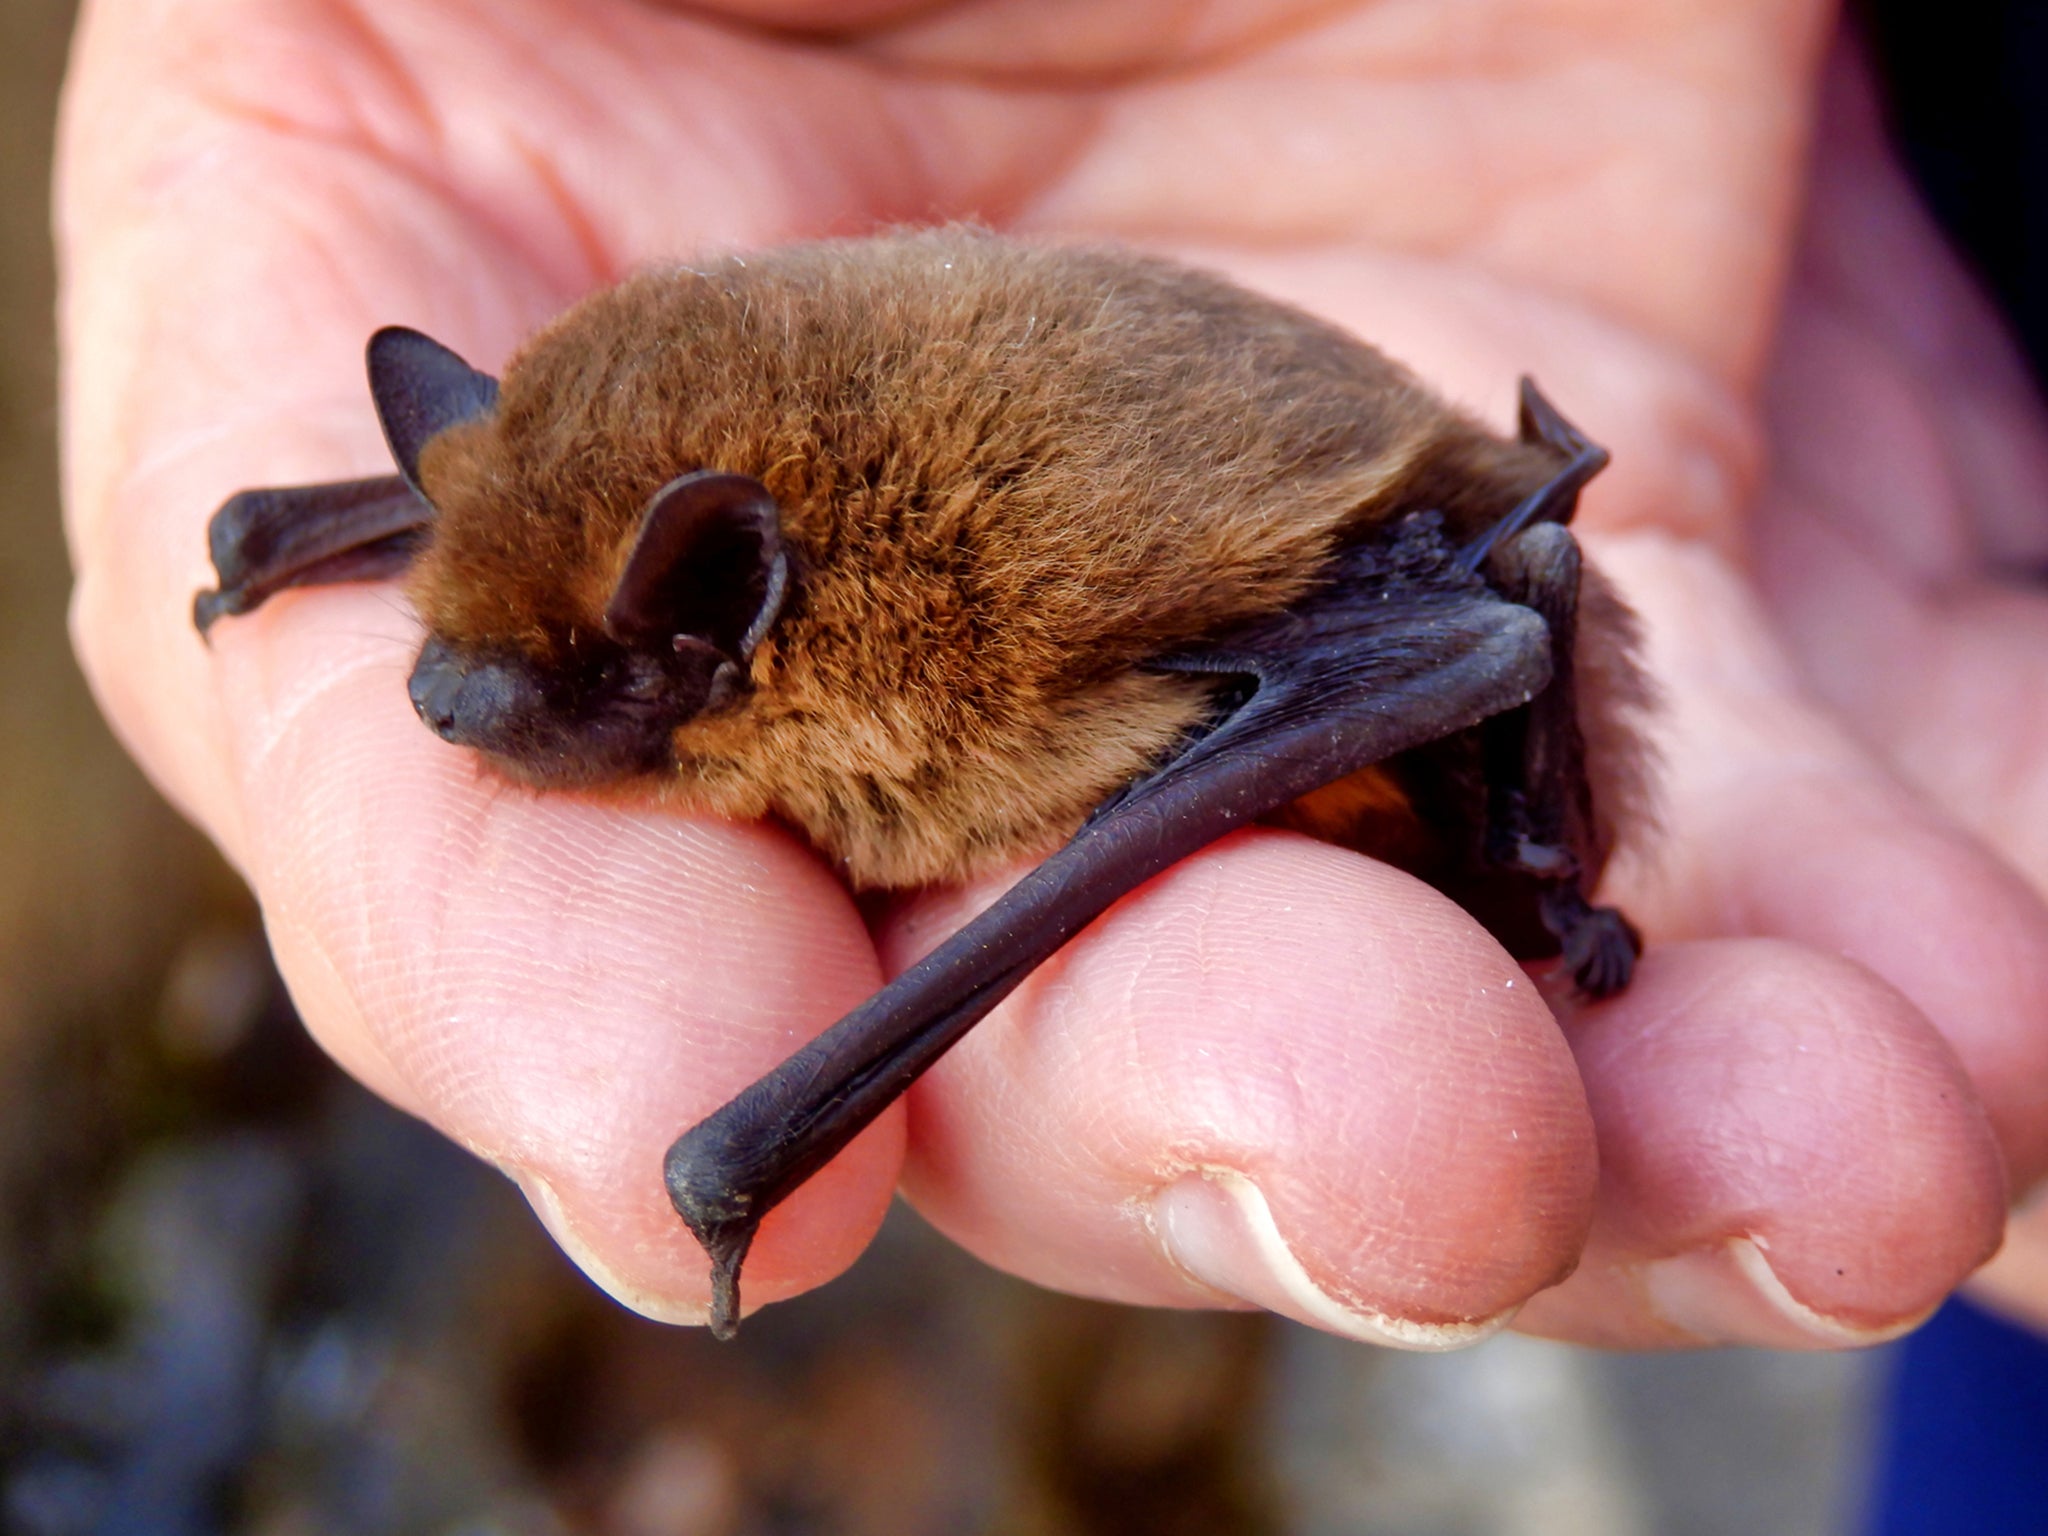 A record breaking pipistrelle bat flew all the way from London to Russia before being killed by a cat. This image shows common pipistrelle bat